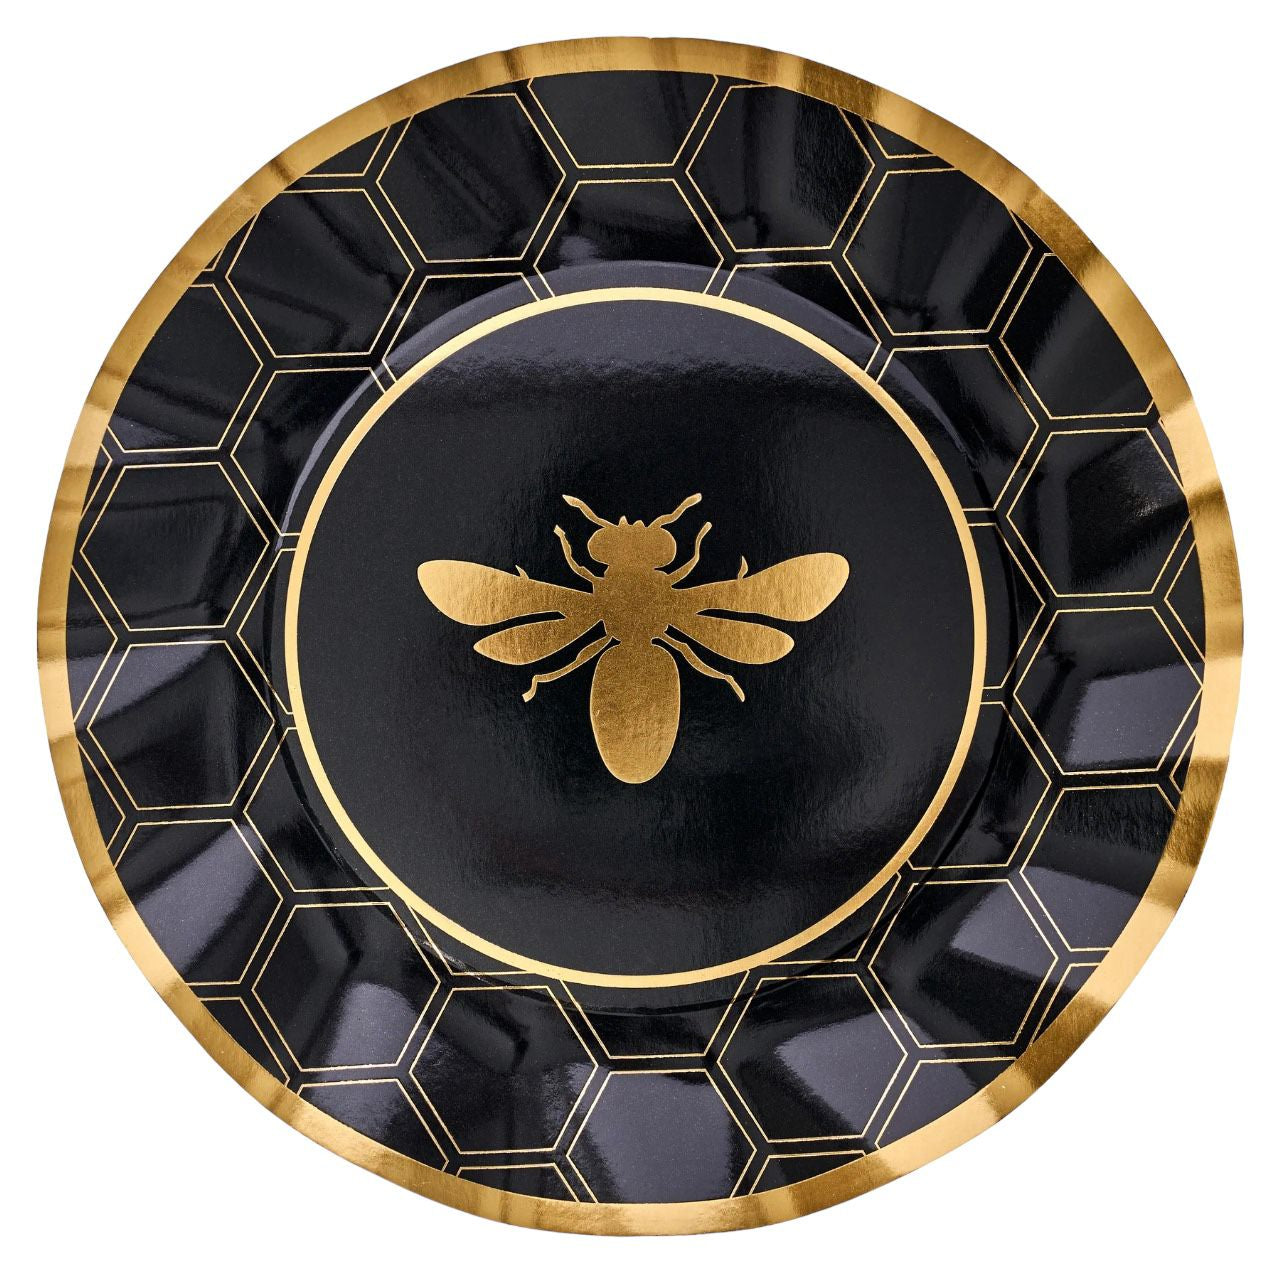 HoneyBee Paper Dinner Plate: Black and gold plate with a bee design and ruffled edge, ideal for elegant events. Pack of 8.